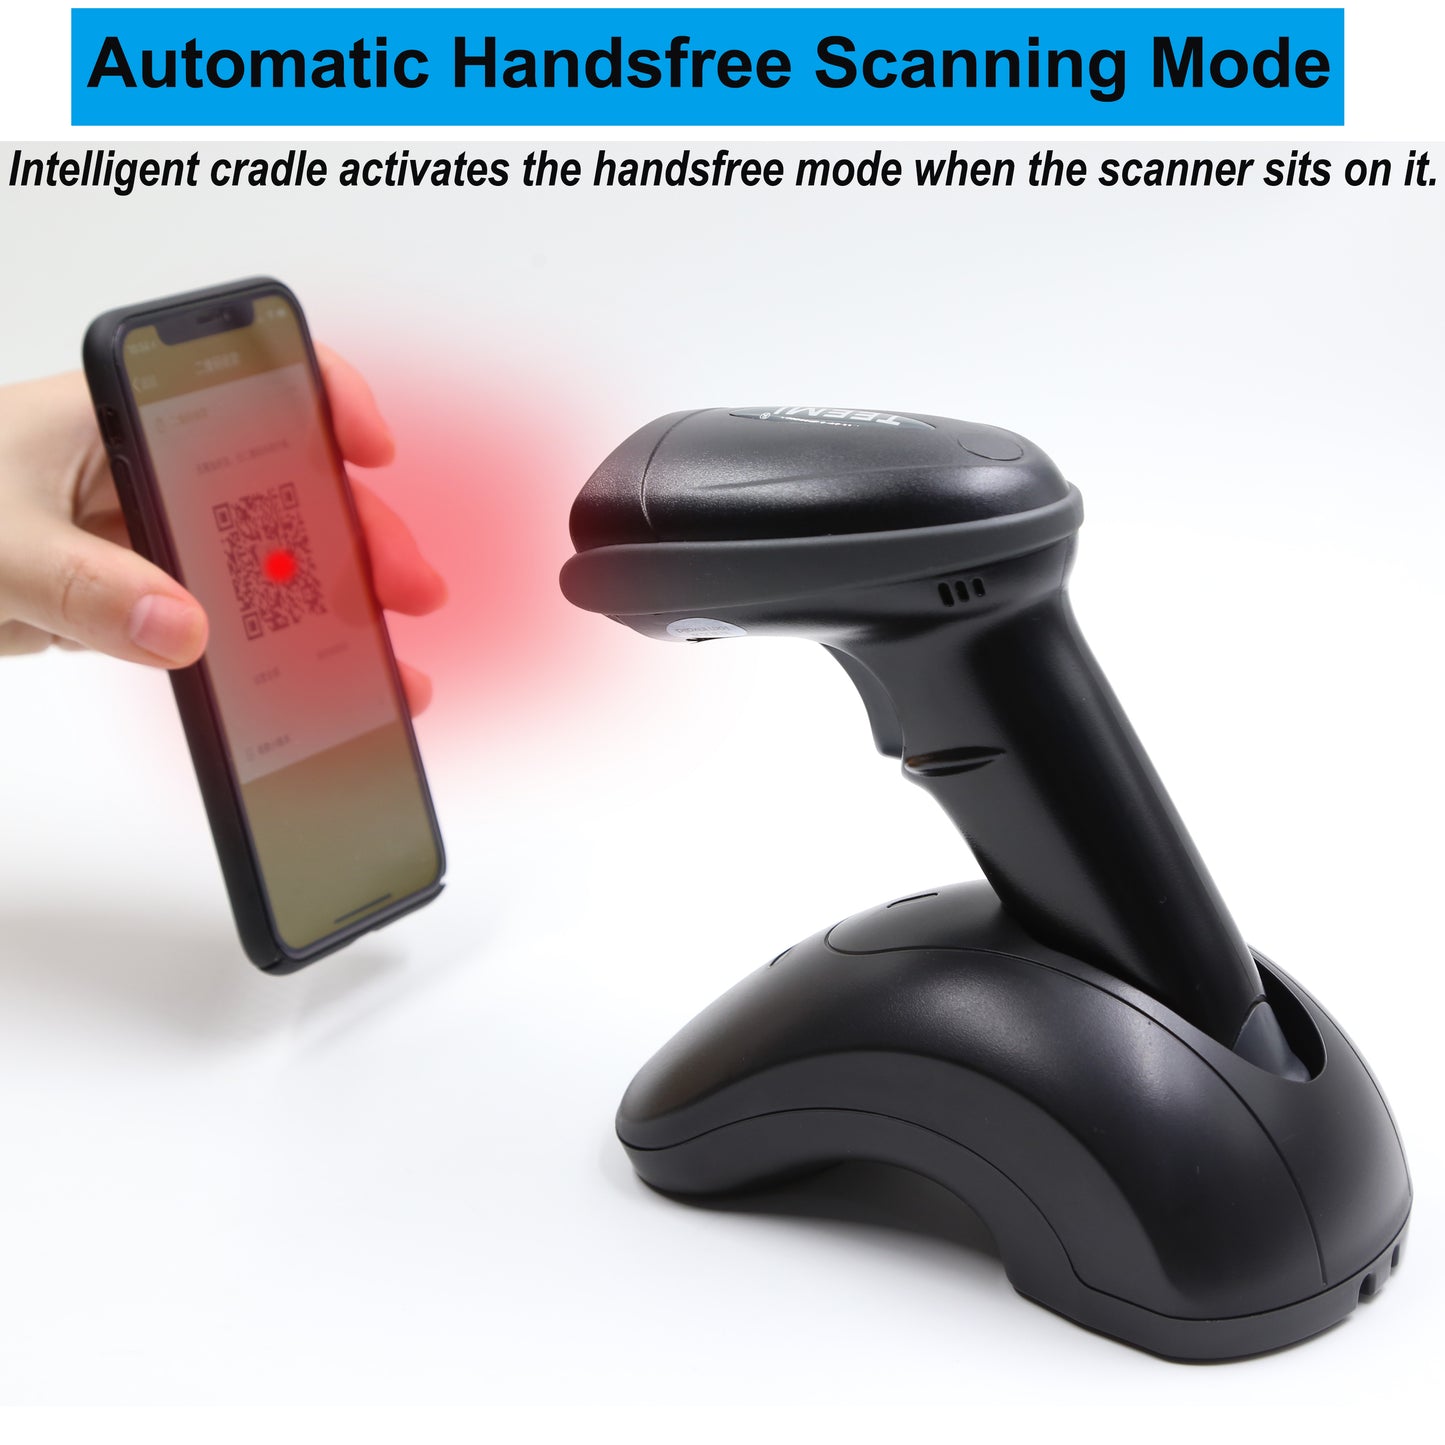 Case of 20, TEEMI TMSL-55CR 2D Bluetooth Barcode Scanner with USB Cradle, Handheld Handsfree Automatic Screen Scanning Scan QR Datamatrix PDF417 Postal and OCR Codes